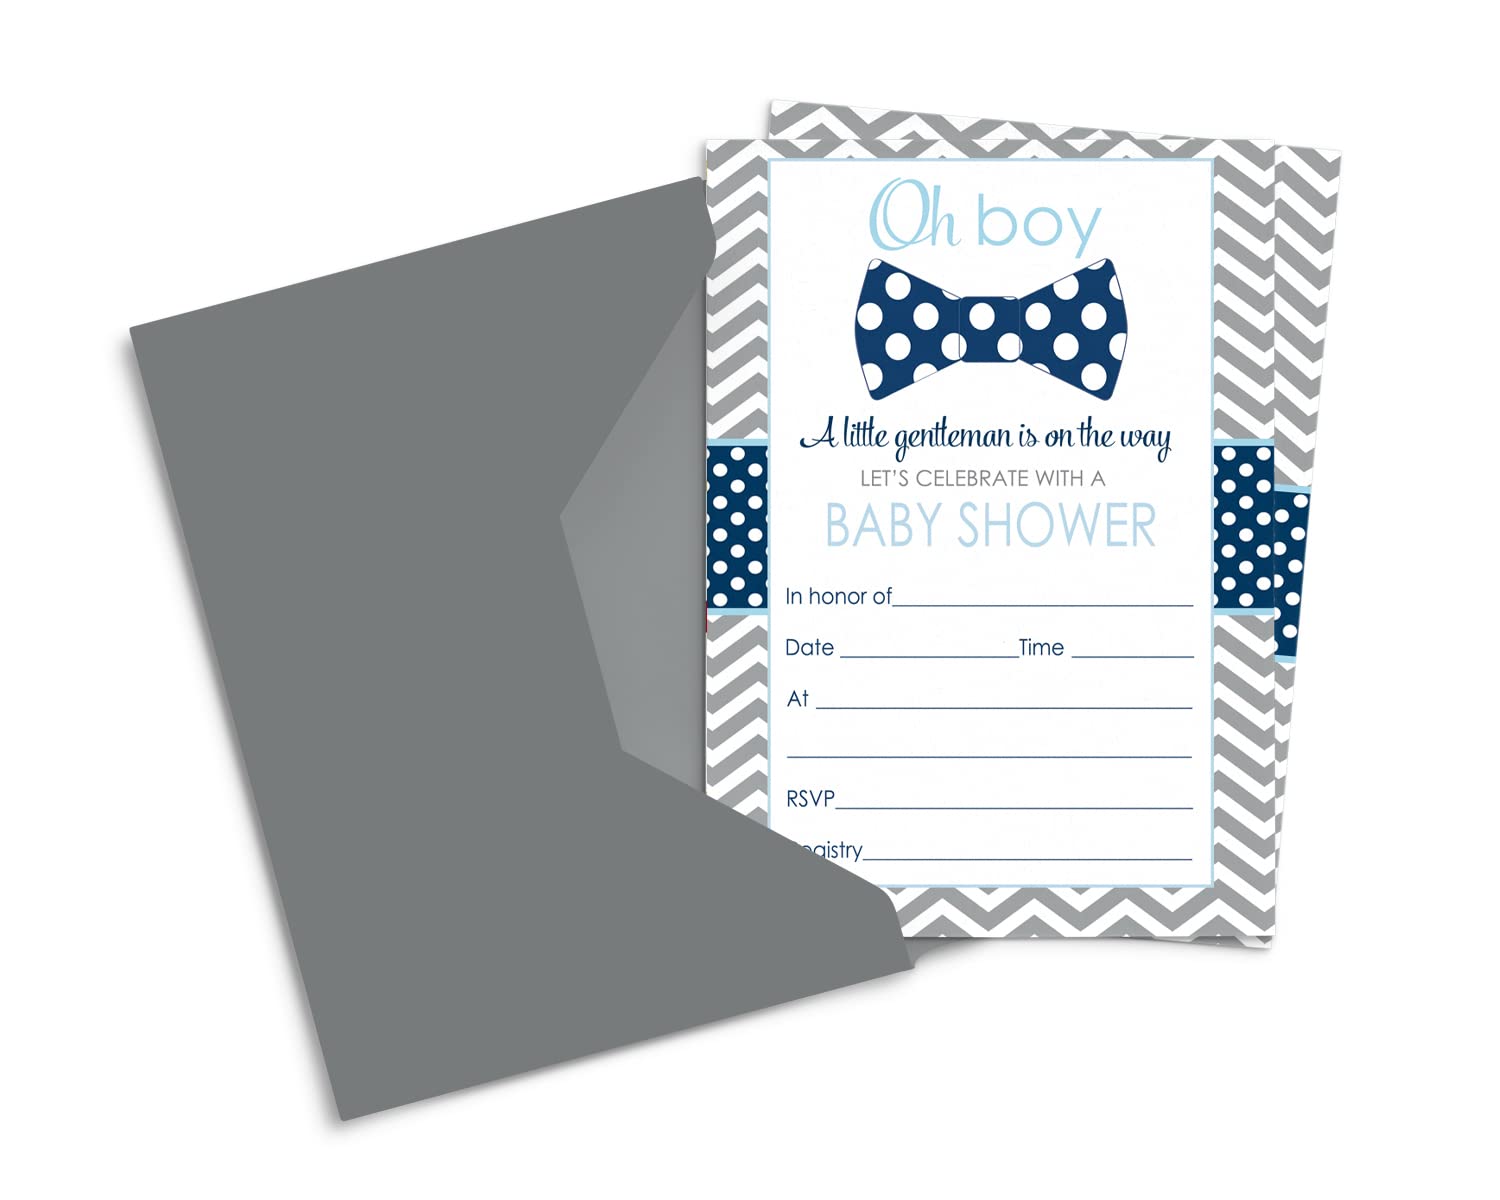 Bow Tie Baby Shower Invitations with Envelopes (15 Pack) Blank Invites for Boys Parties - Little Man Theme Blue and Grey – Blank Invite to Handwrite Custom Details - 4x6 Printed Card Set